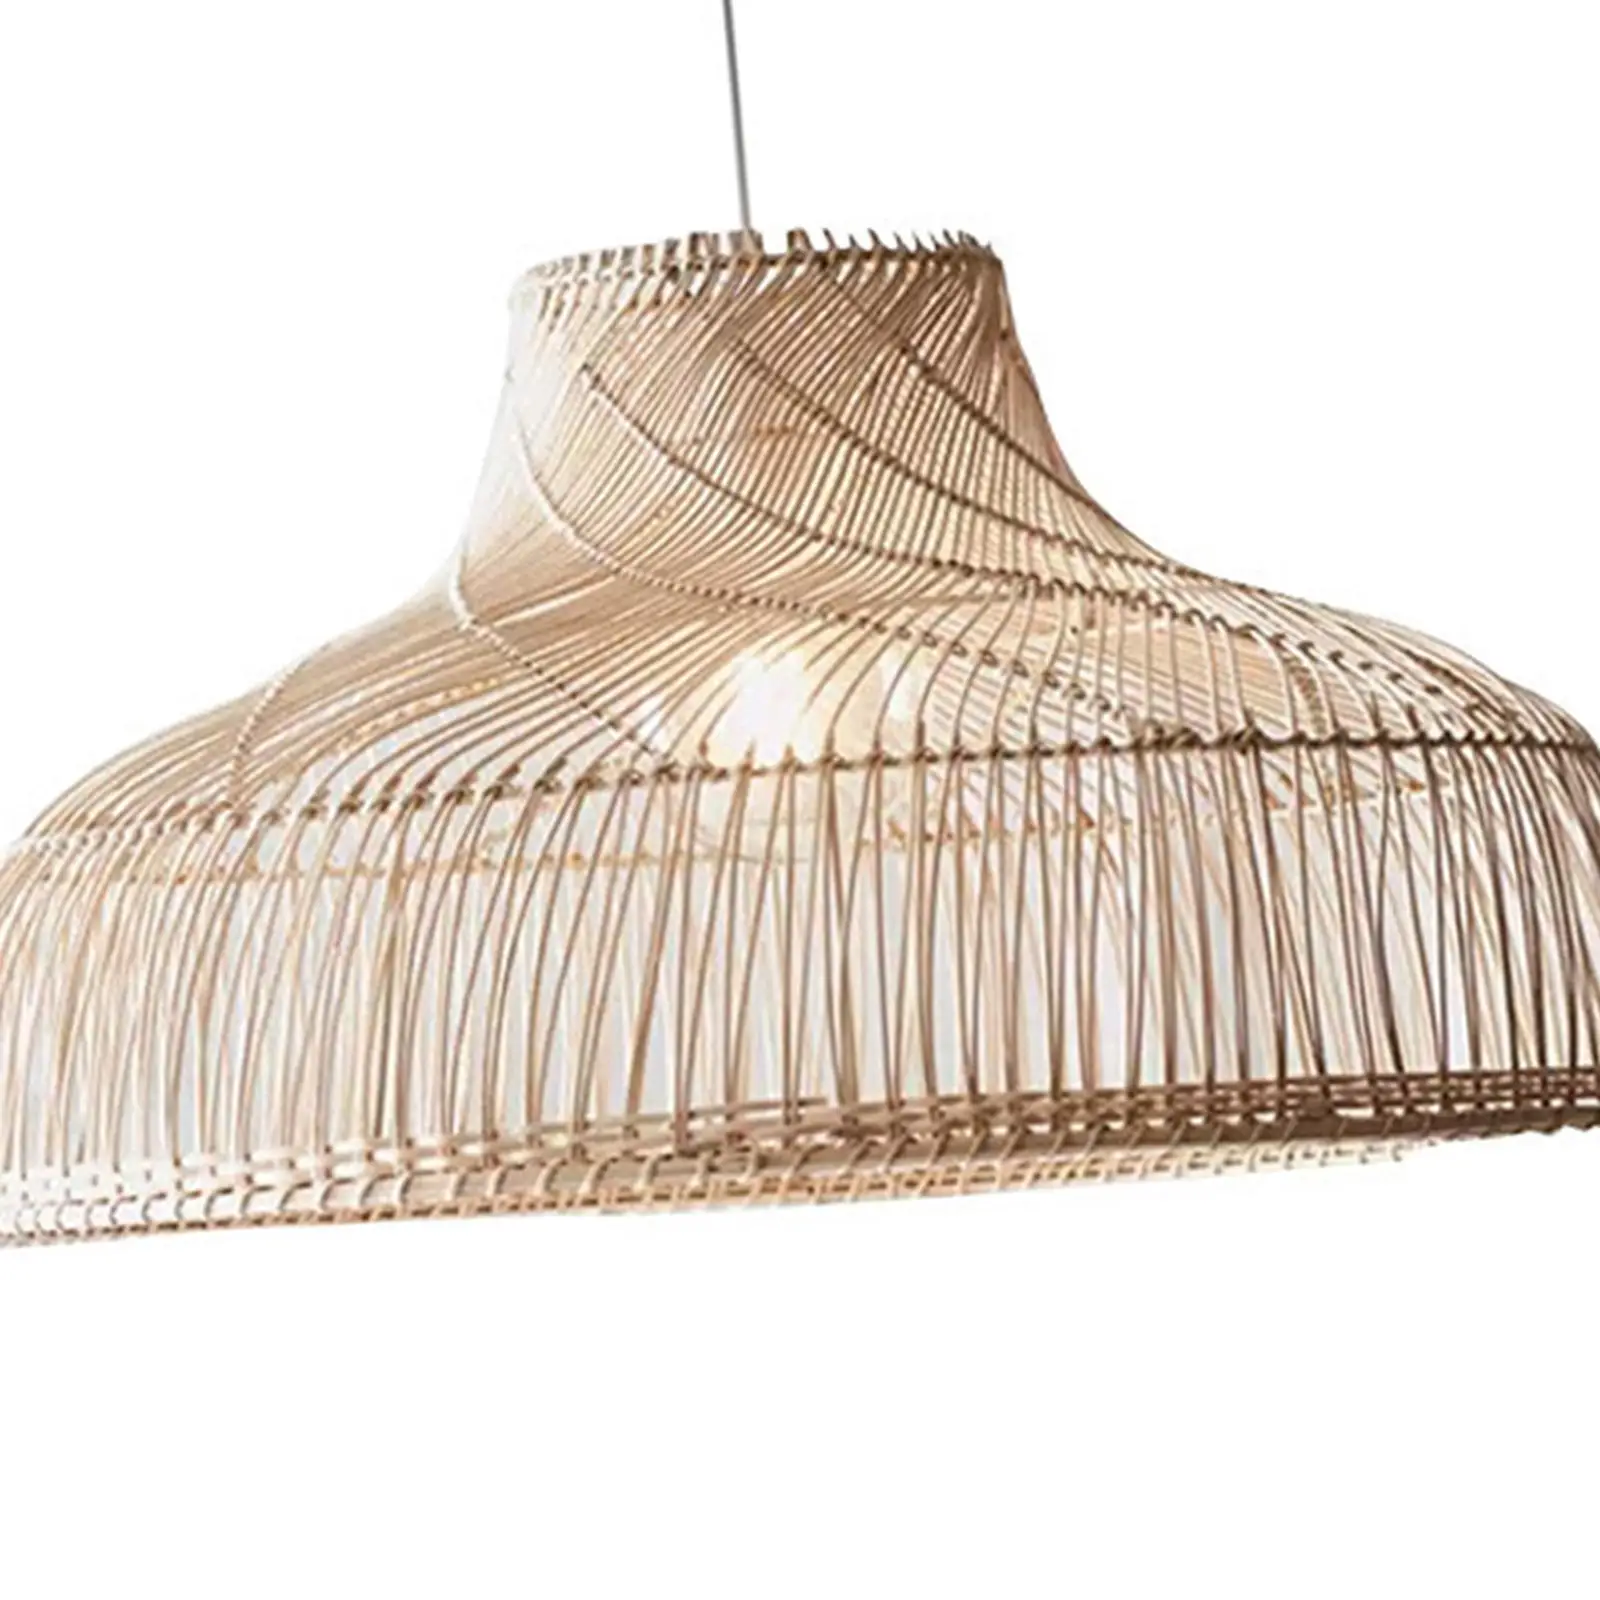 Rattan Woven Lampshade Pendant Lamp Shade for Office Kitchen Decor